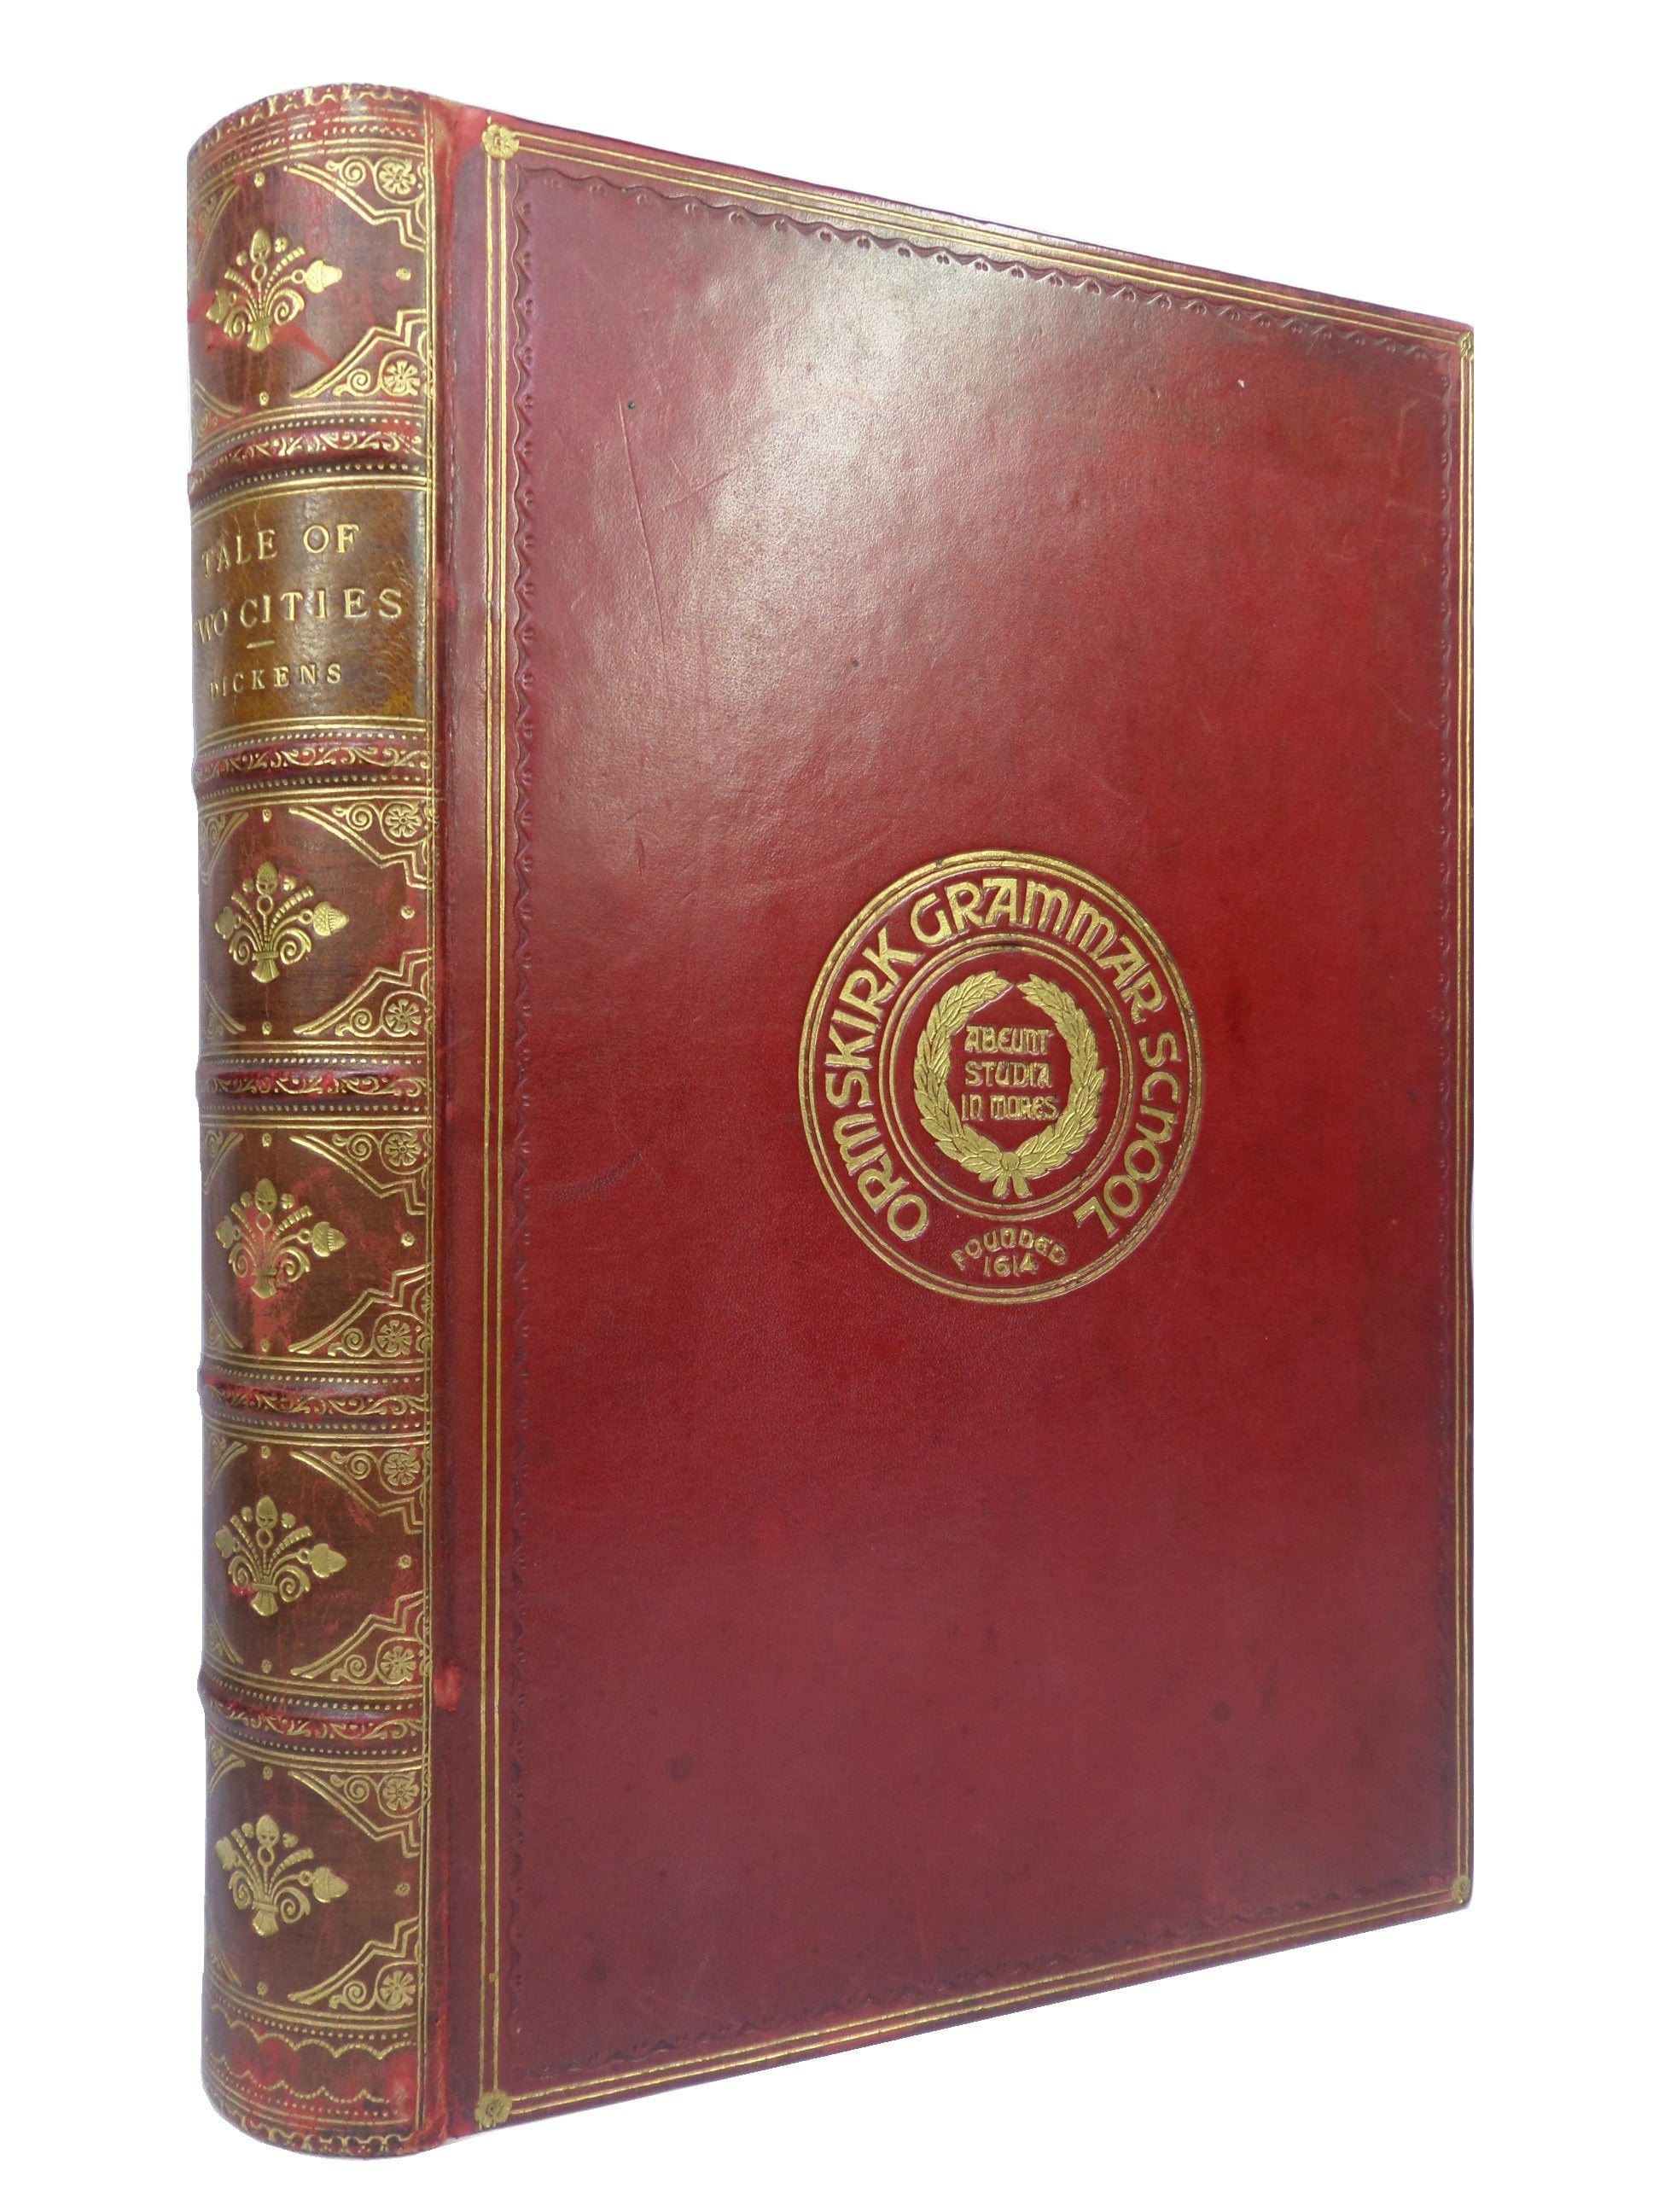 A TALE OF TWO CITIES BY CHARLES DICKENS CA.1900 FINE LEATHER BINDING